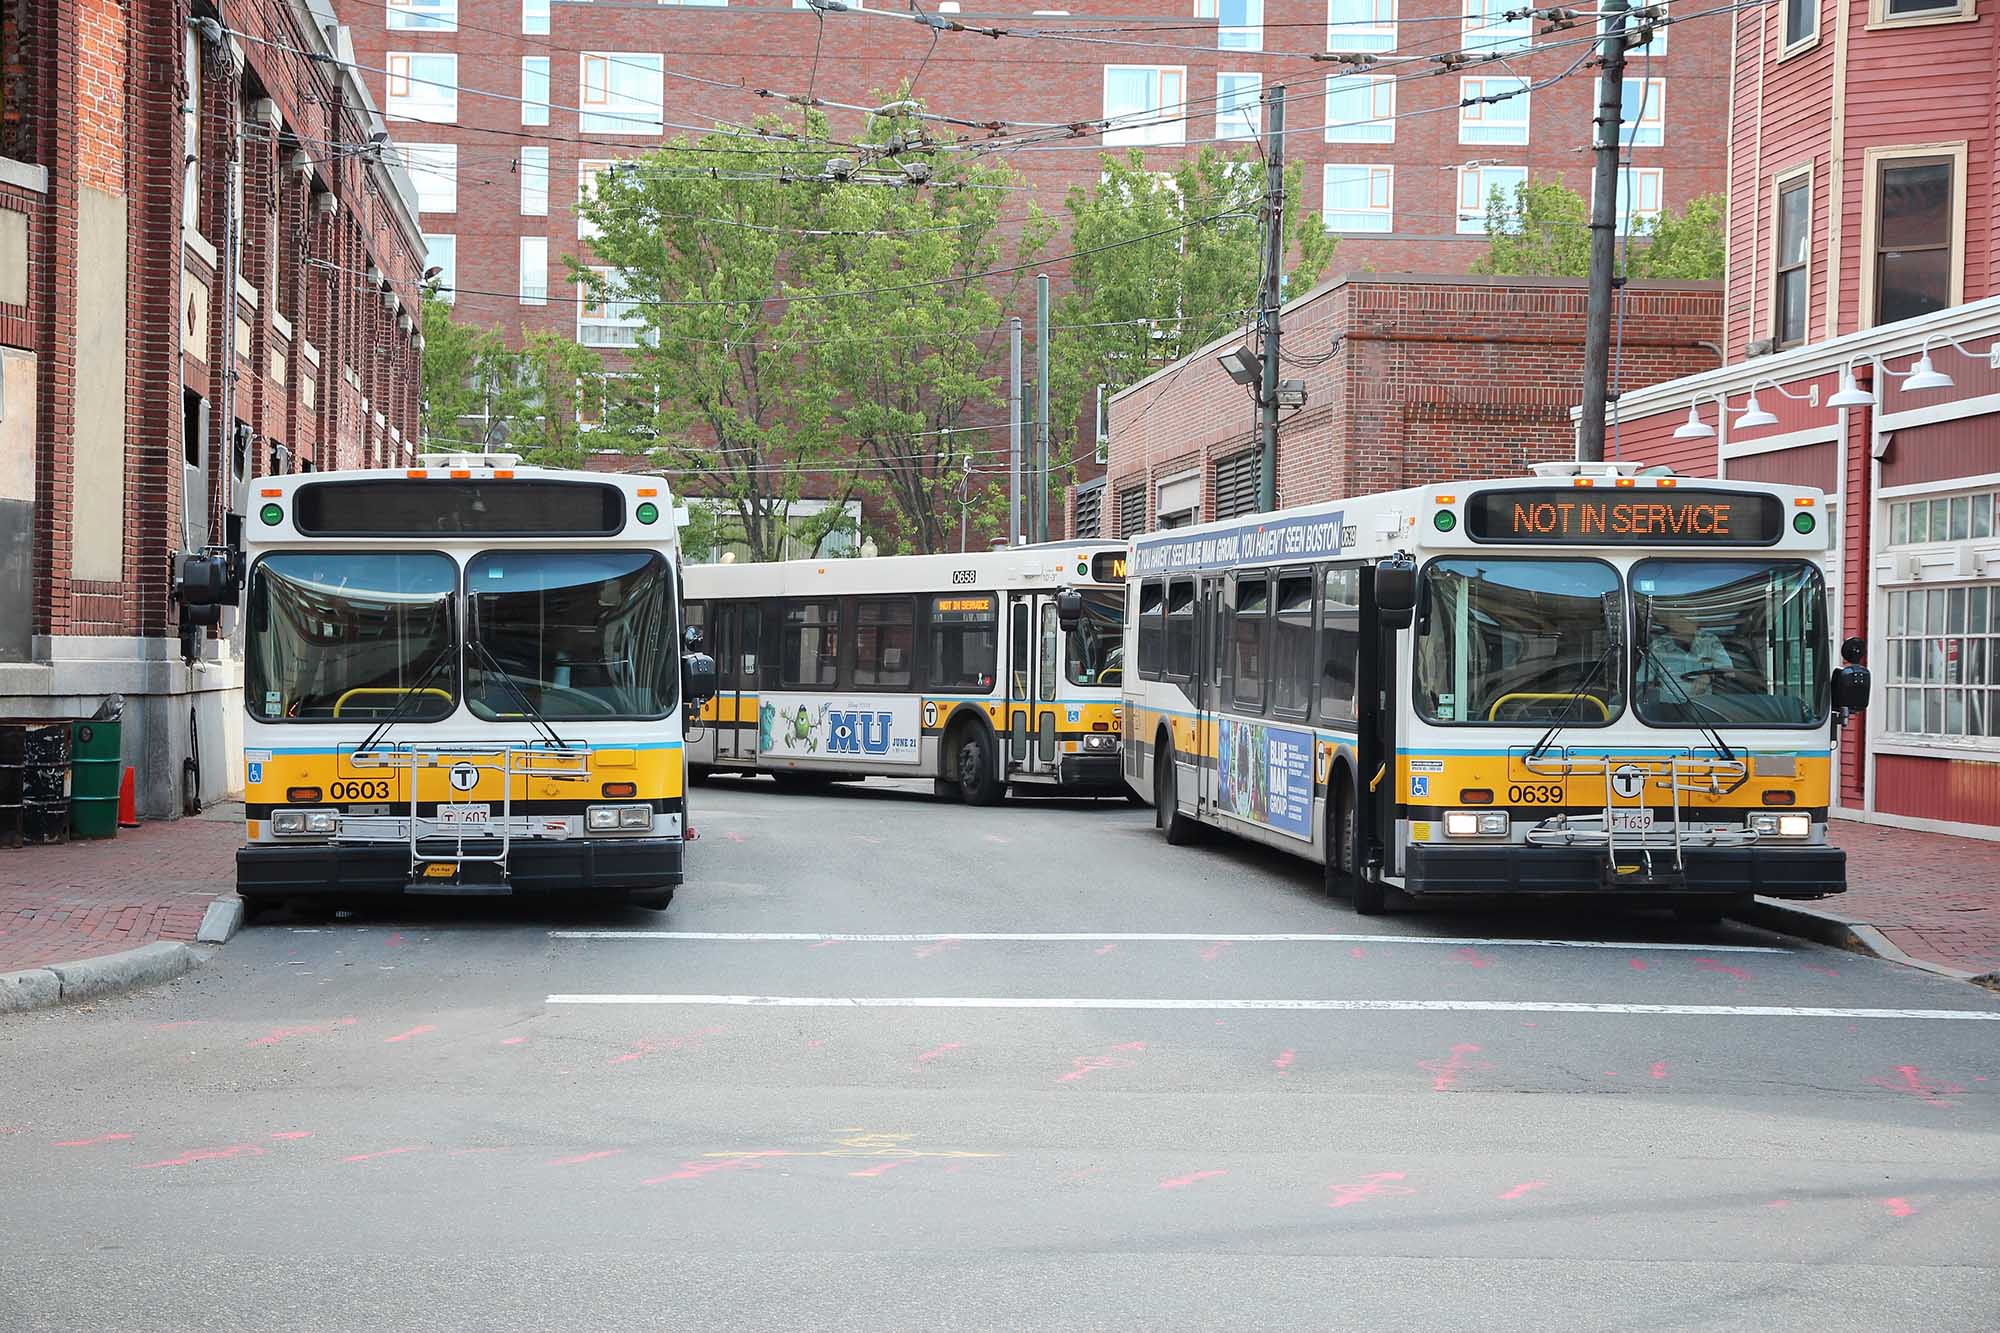 Photo: Boston city buses parked in long lines on either side of a street.